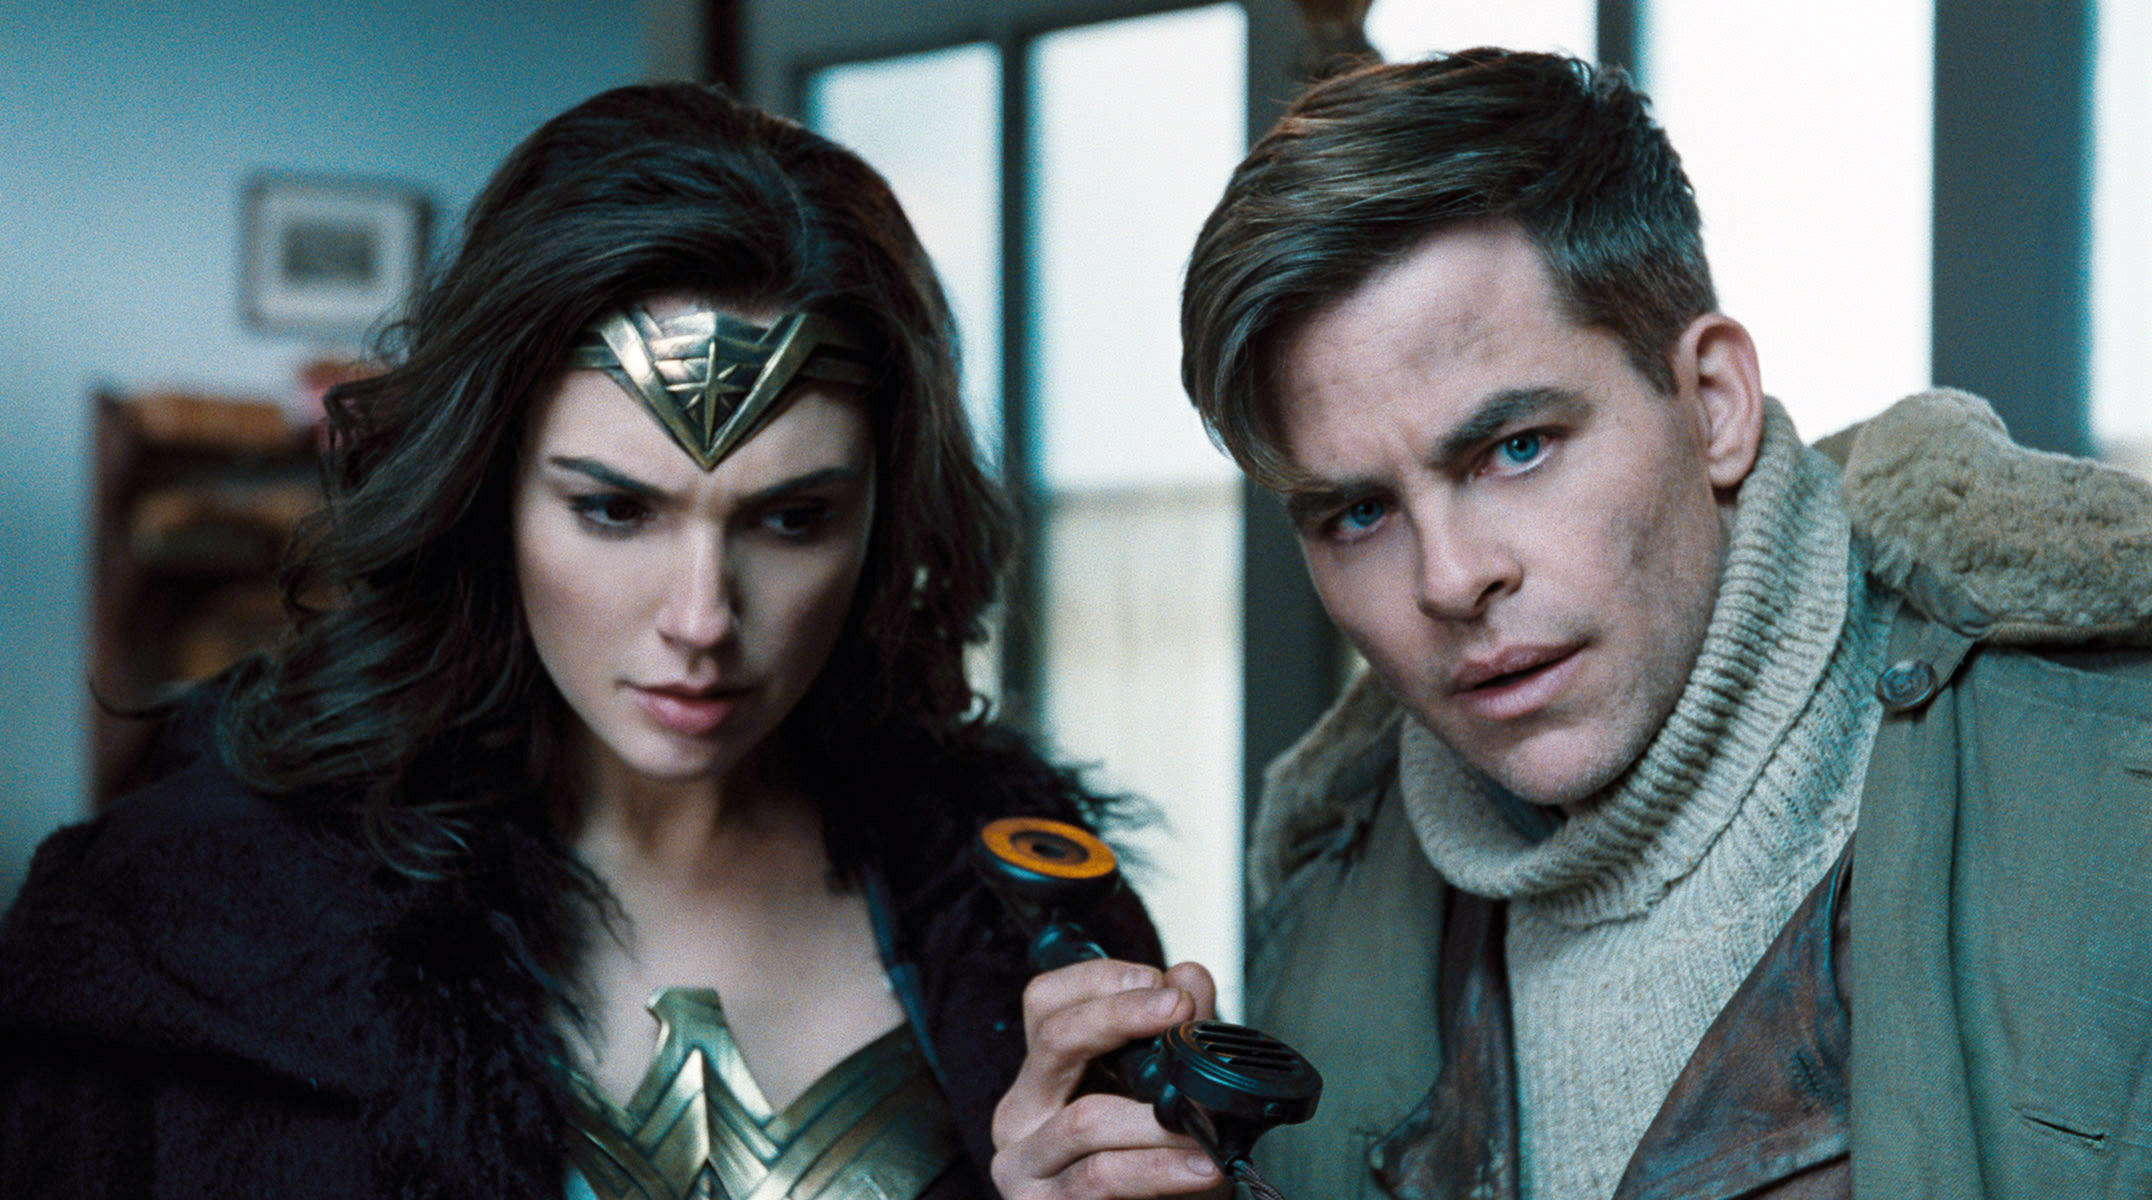 Chris Pine Is ‘Stunned’ by ‘Wonder Woman 3’ Getting Axed, Not That He Would’ve Returned...